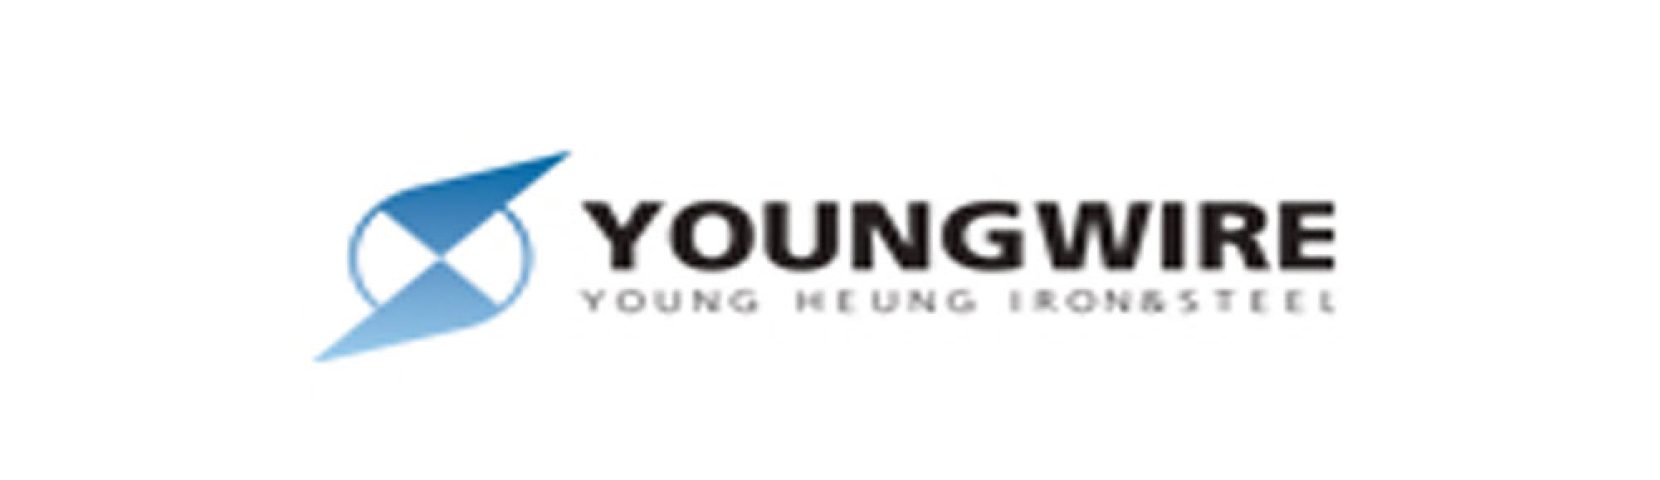 youngwire_